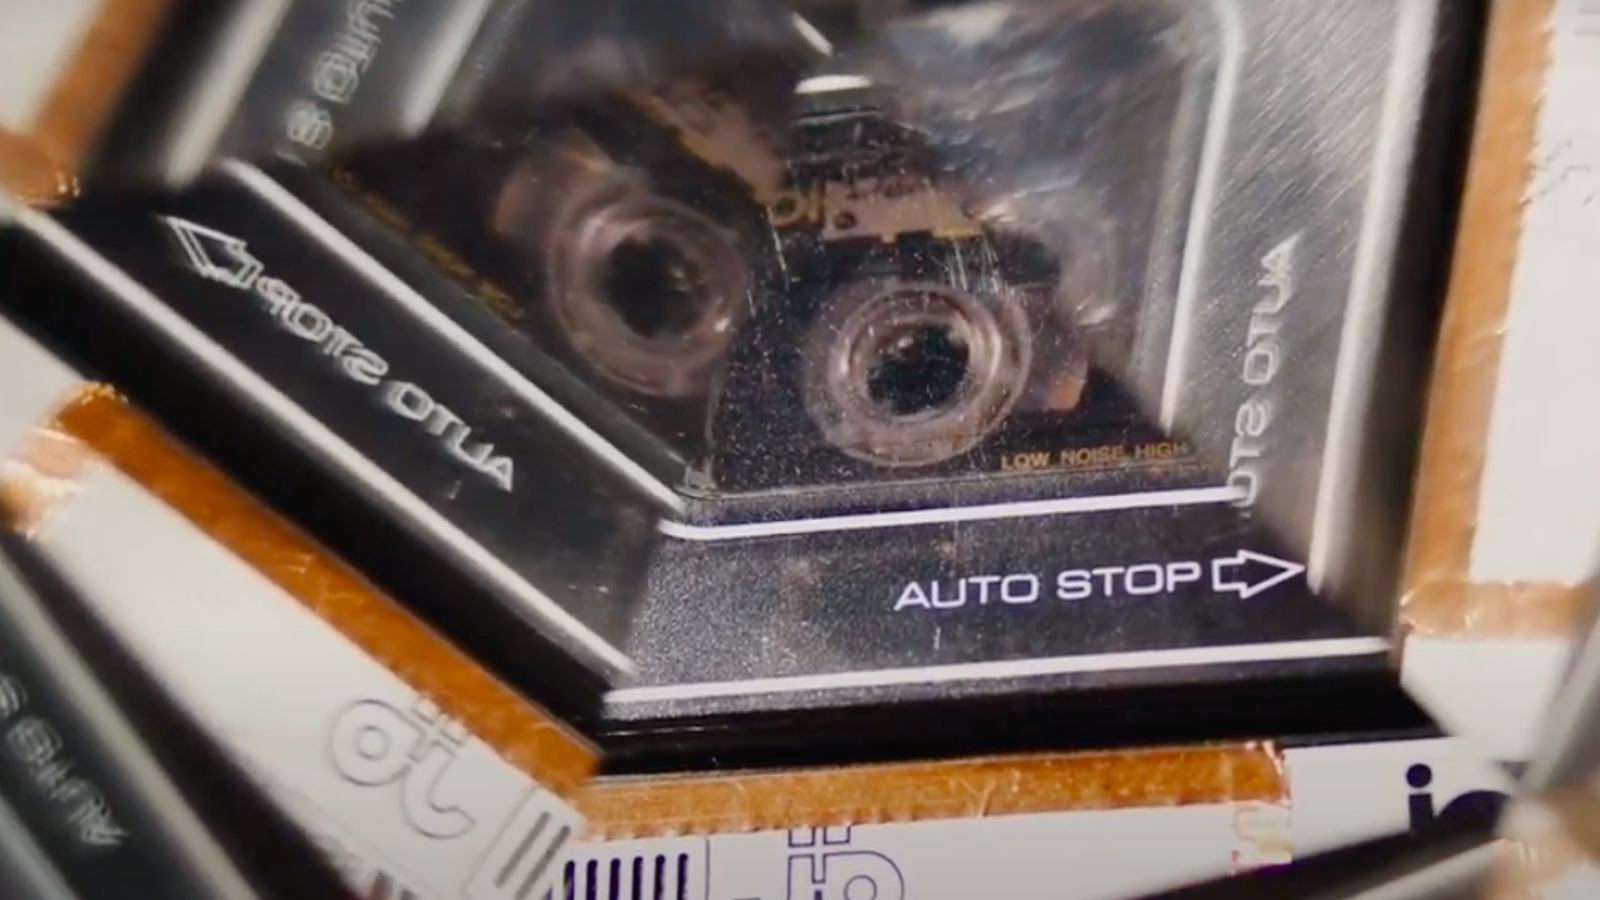 A refracted image of a cassette tape in a player